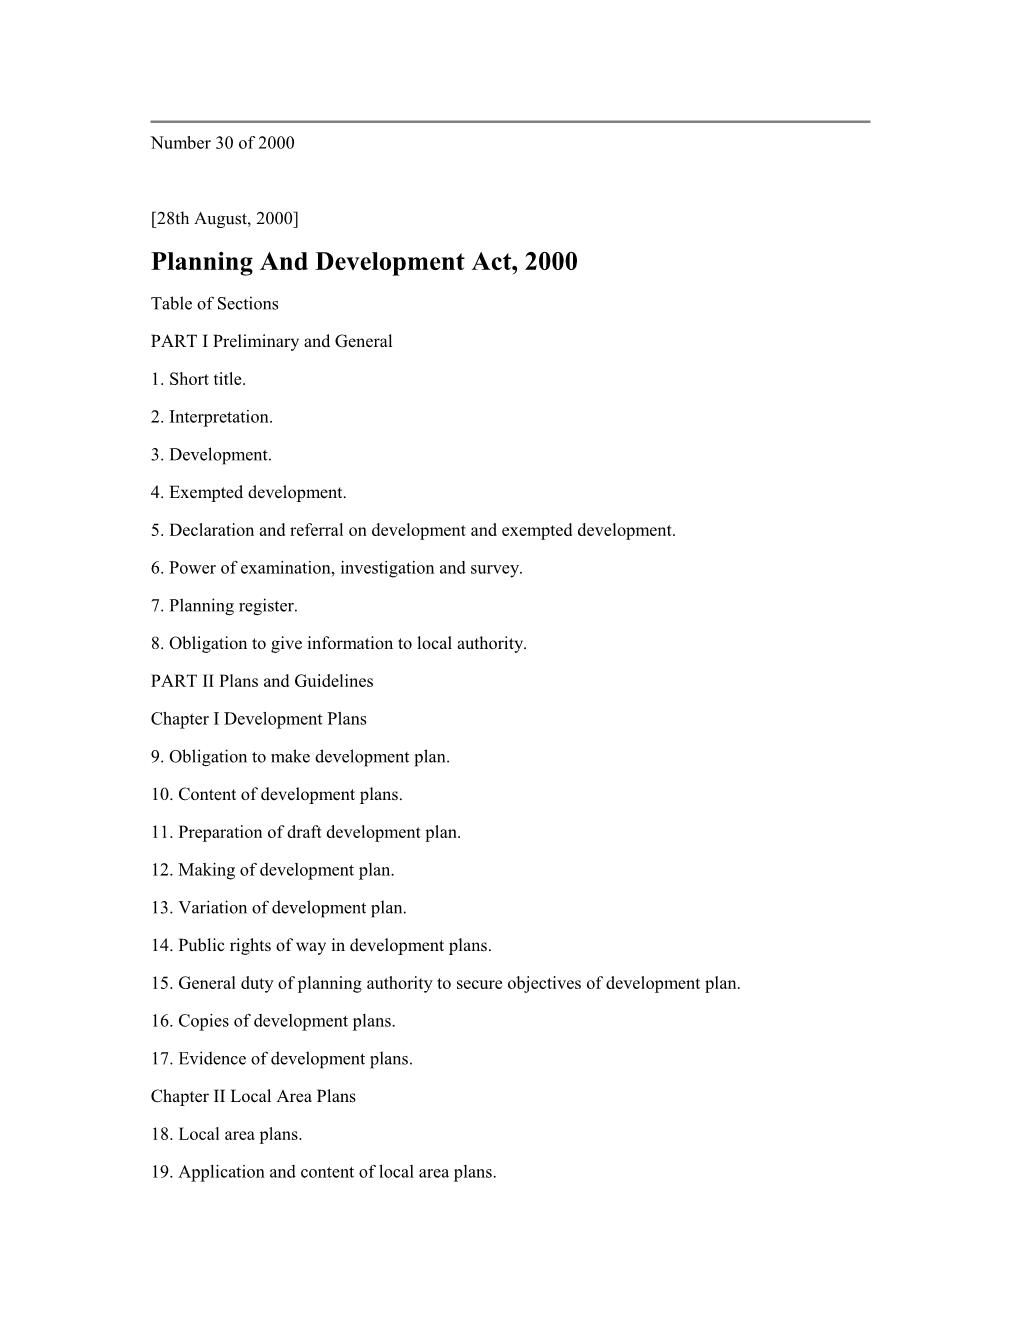 Planning and Development Act, 2000